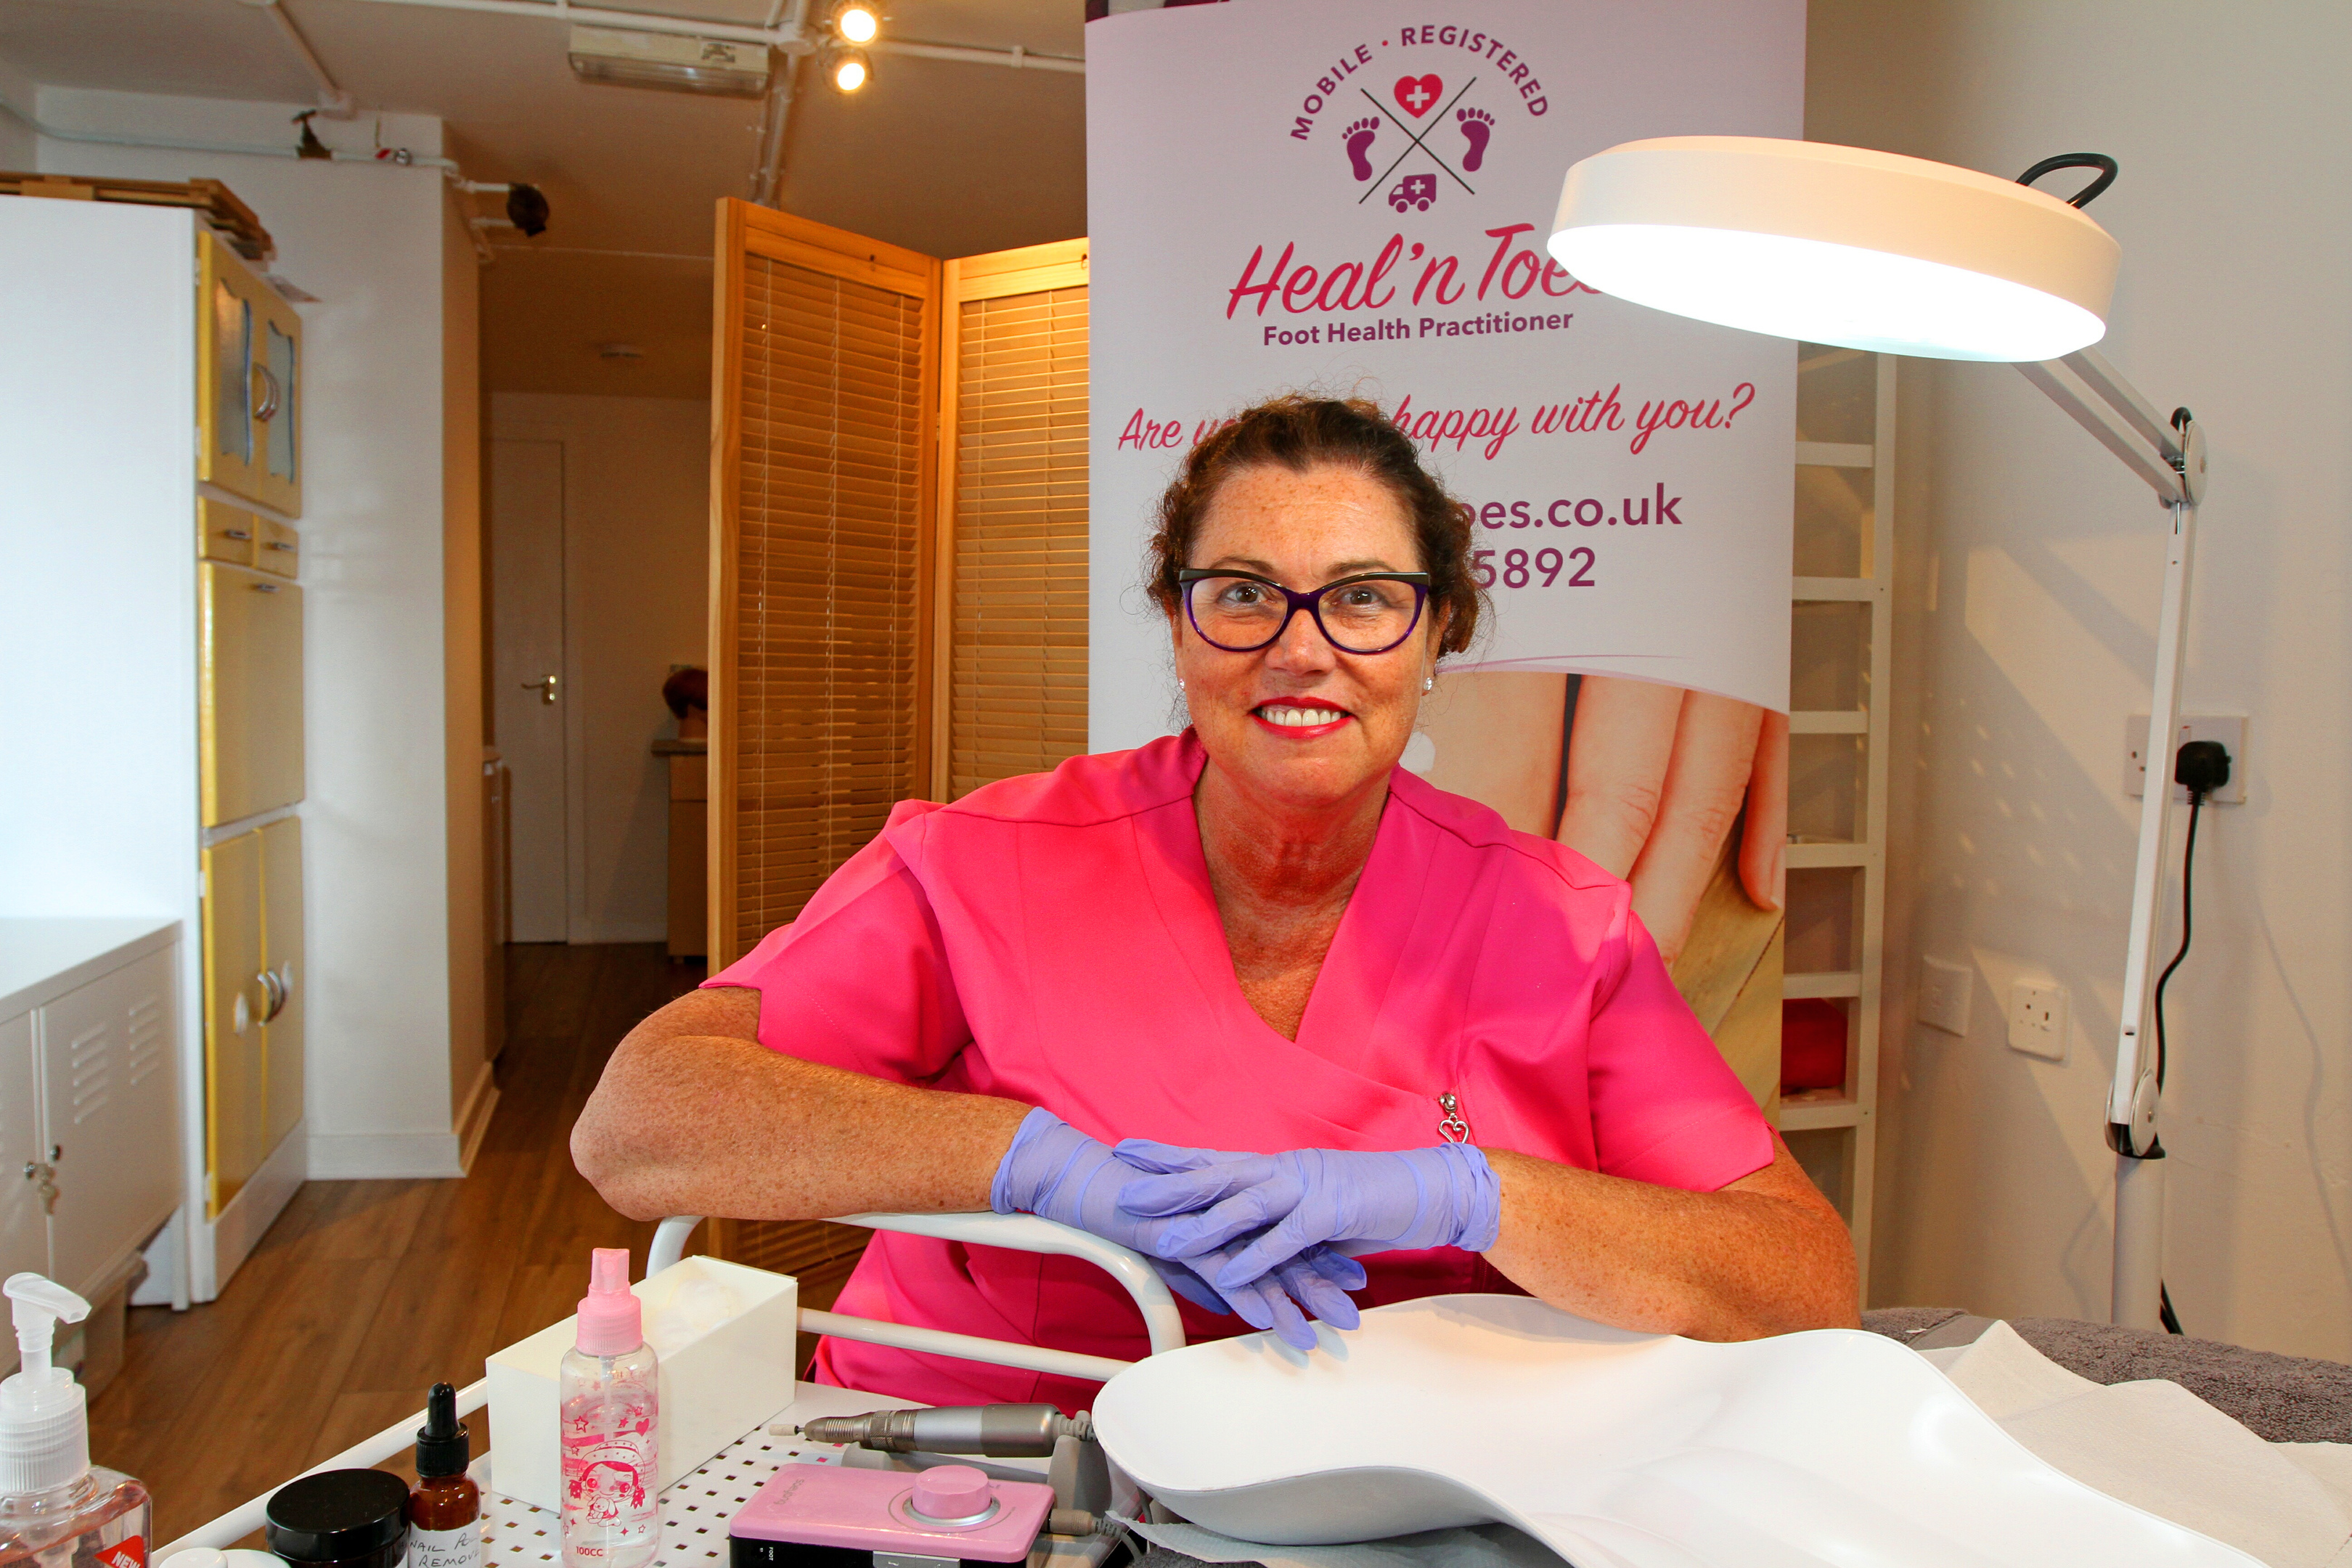 Elaine Woods has set up a podiatry service which will care for homeless and vulnerable people in the city, free of charge.